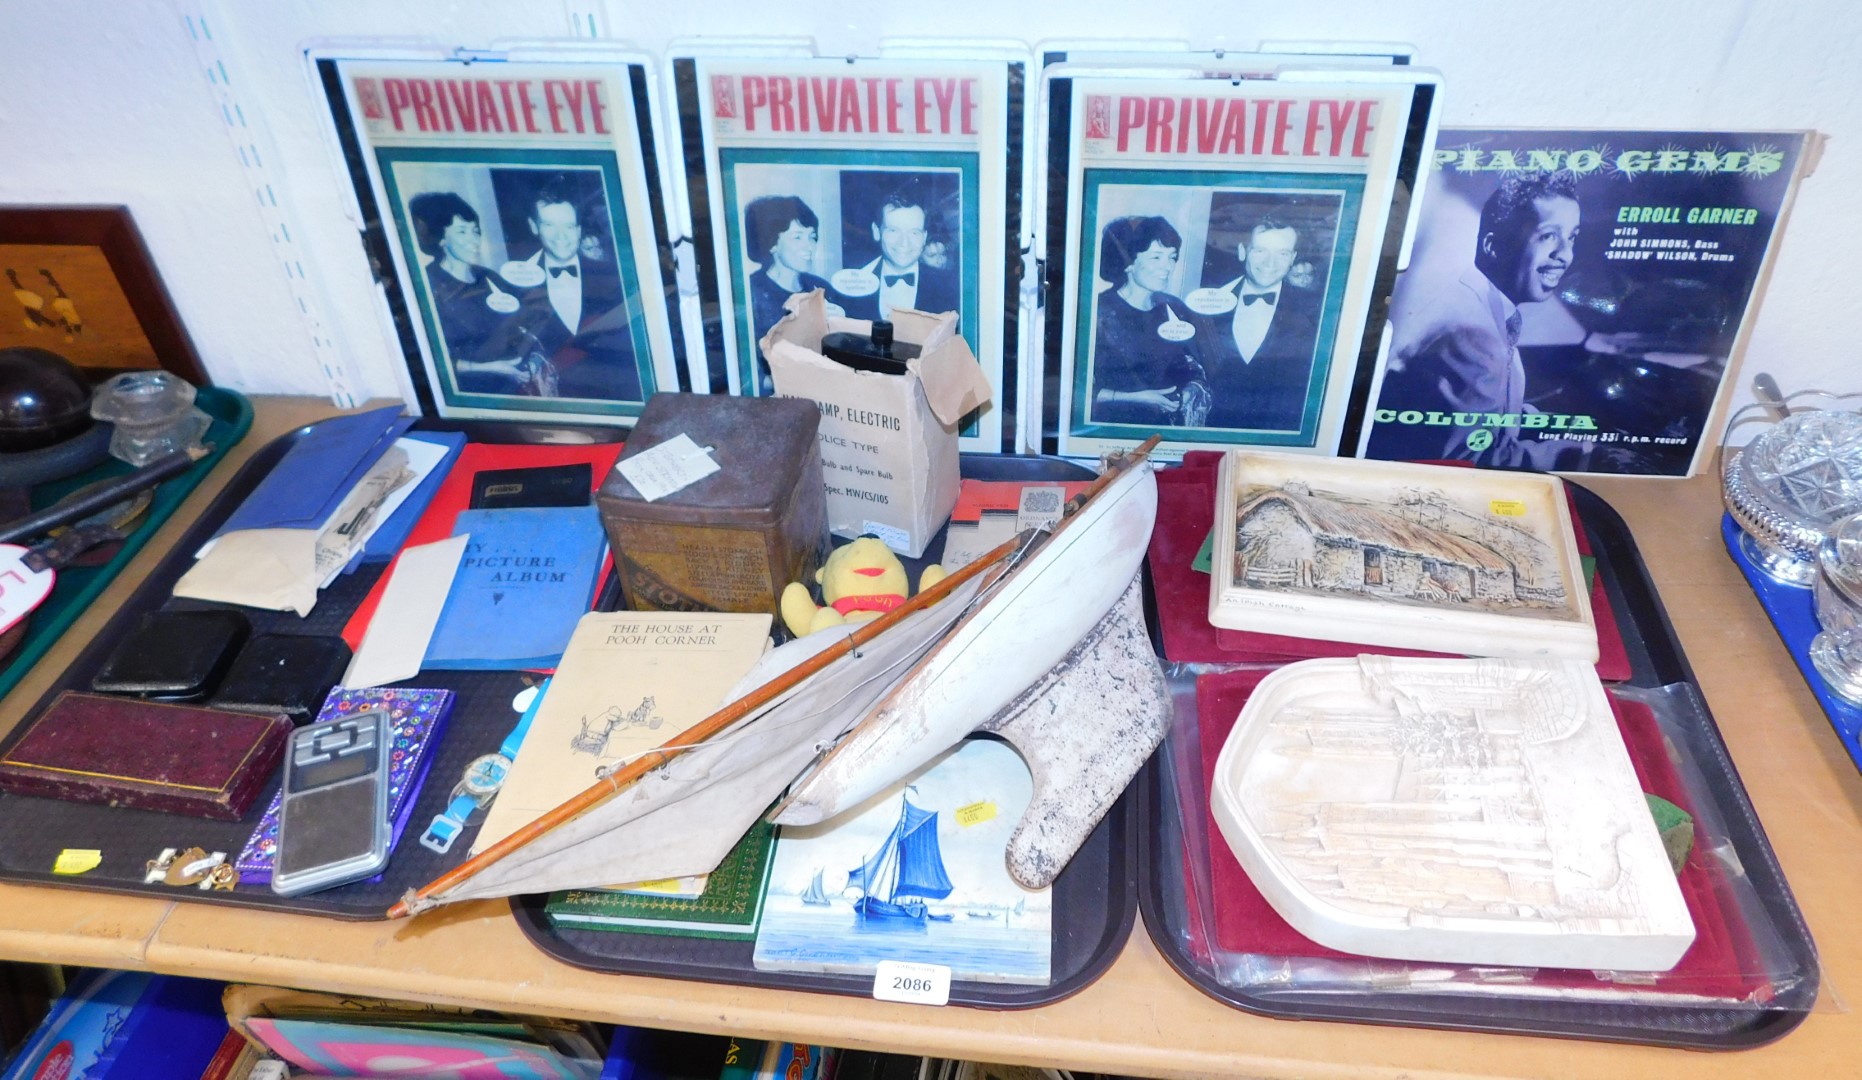 Miscellaneous items including jewellery boxes, photograph album, The House at Pooh corner by A.A. Mi